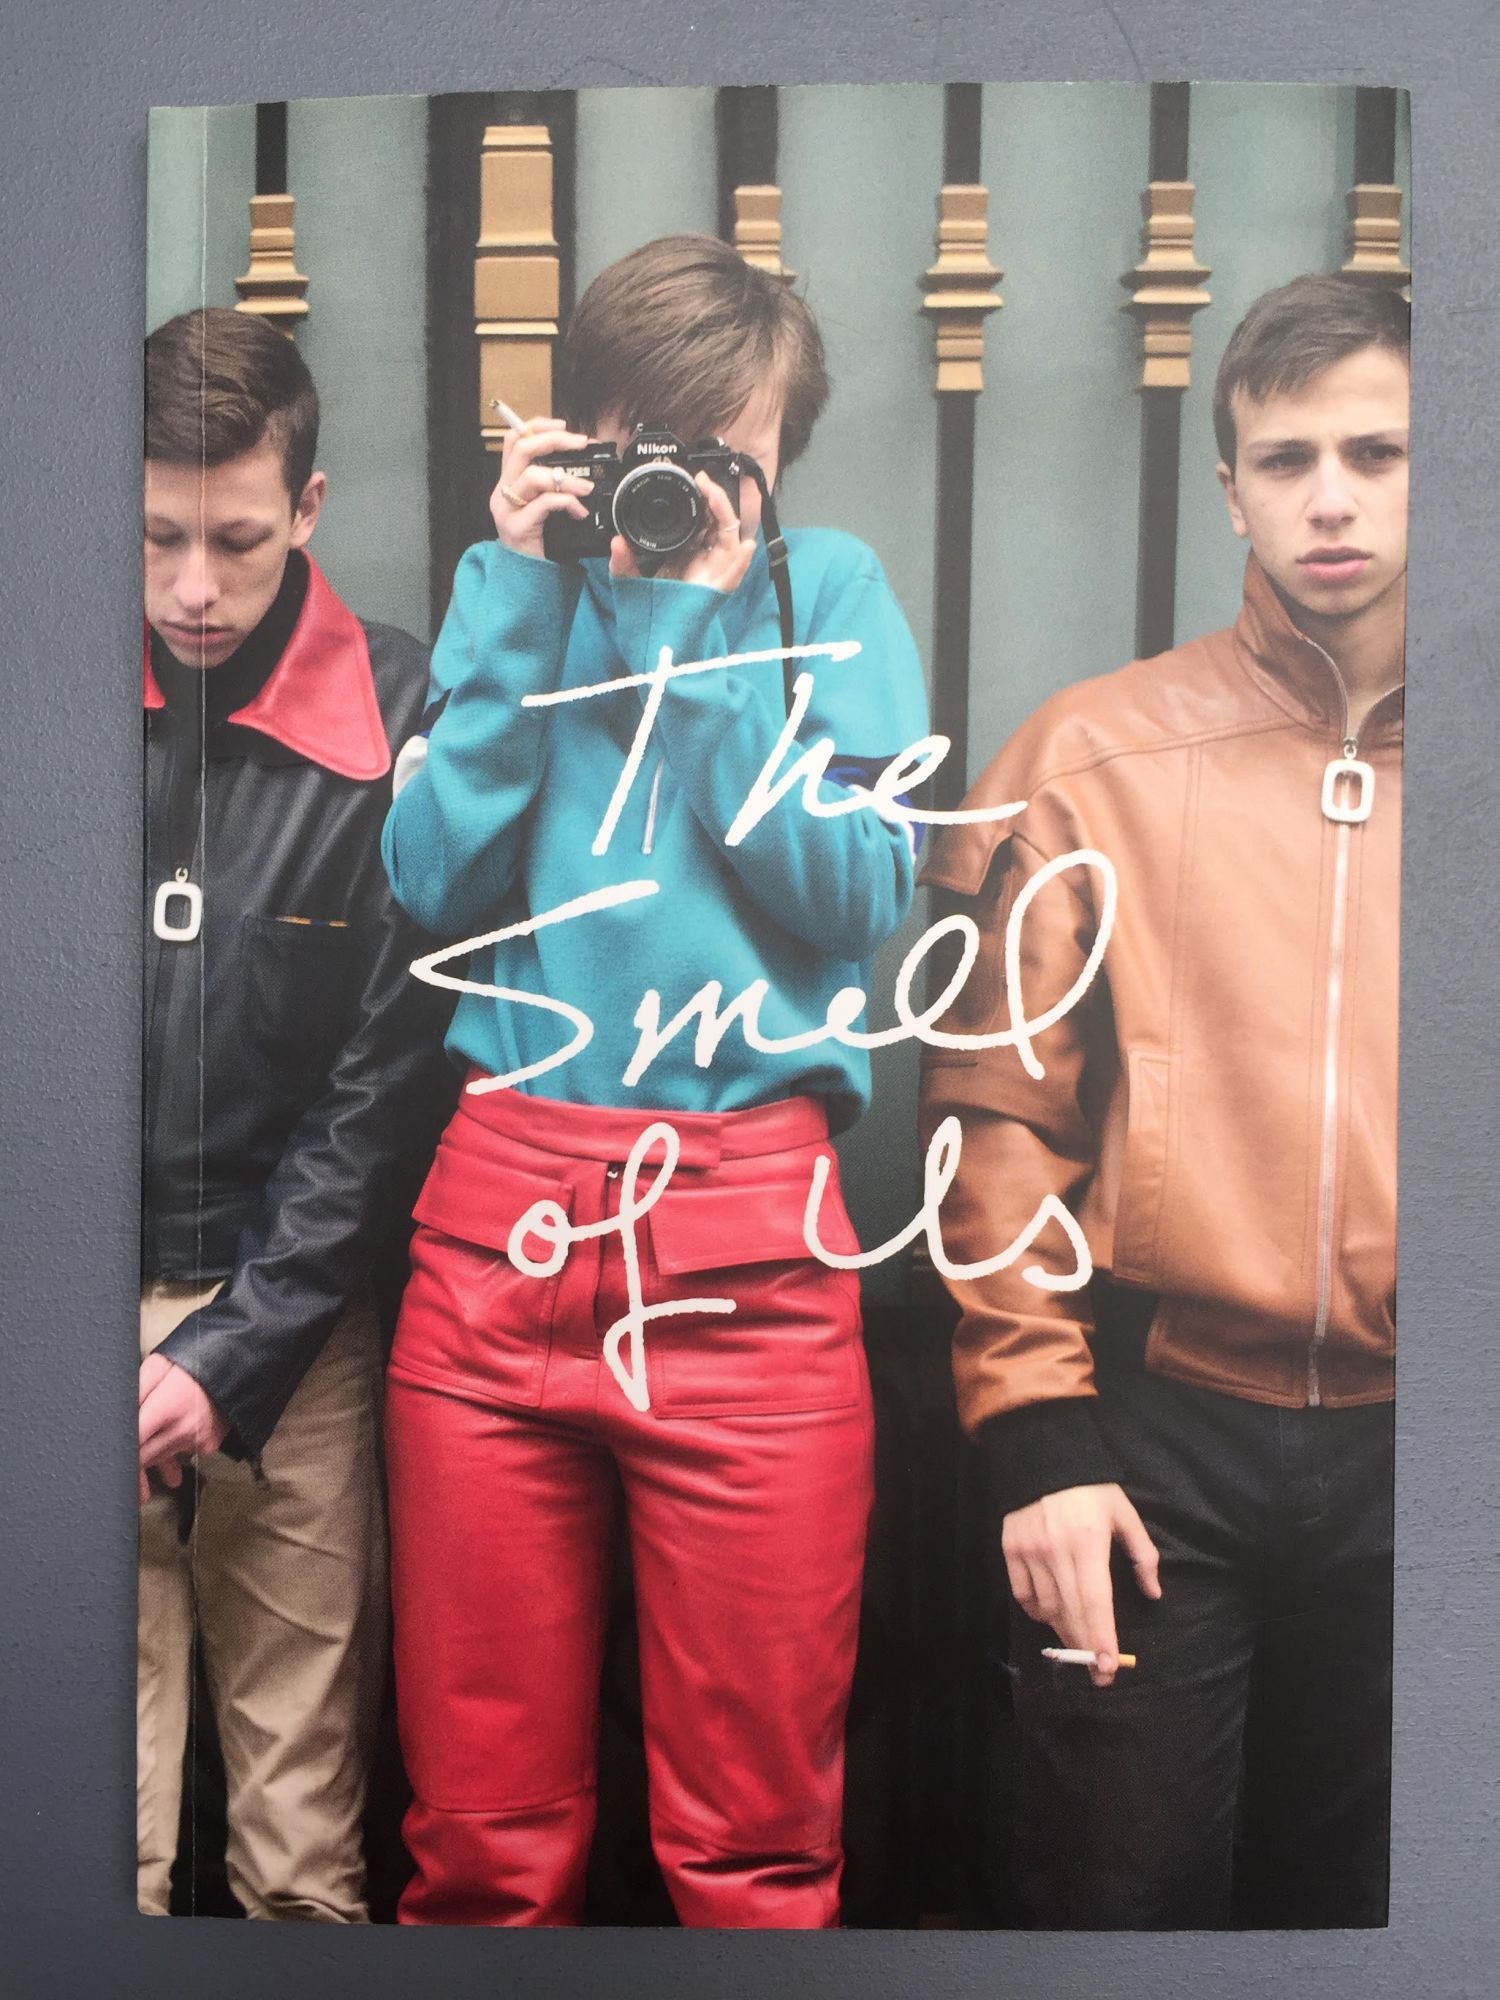 The Smell of Us by Larry Clark, J W. Anderson on Boo-Hooray